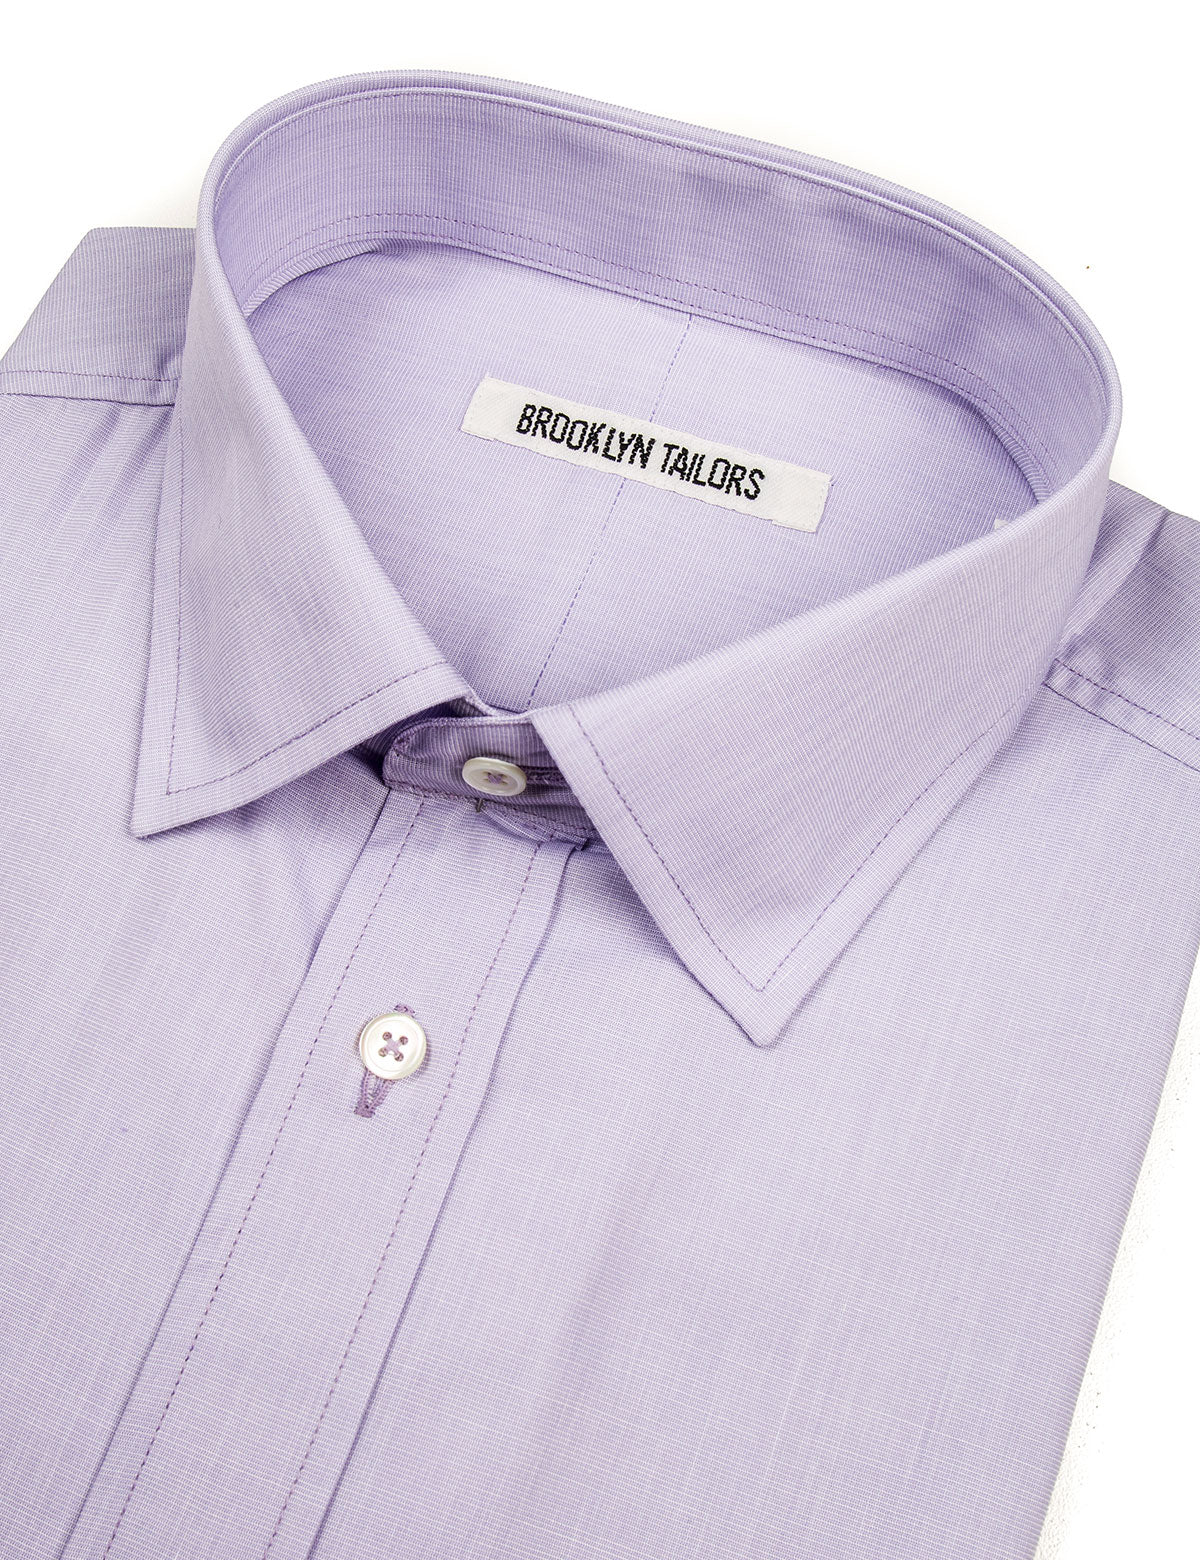 Detail shot of collar and placket on Brooklyn Tailors BKT20 Slim Dress Shirt in End-on-End - Lavender